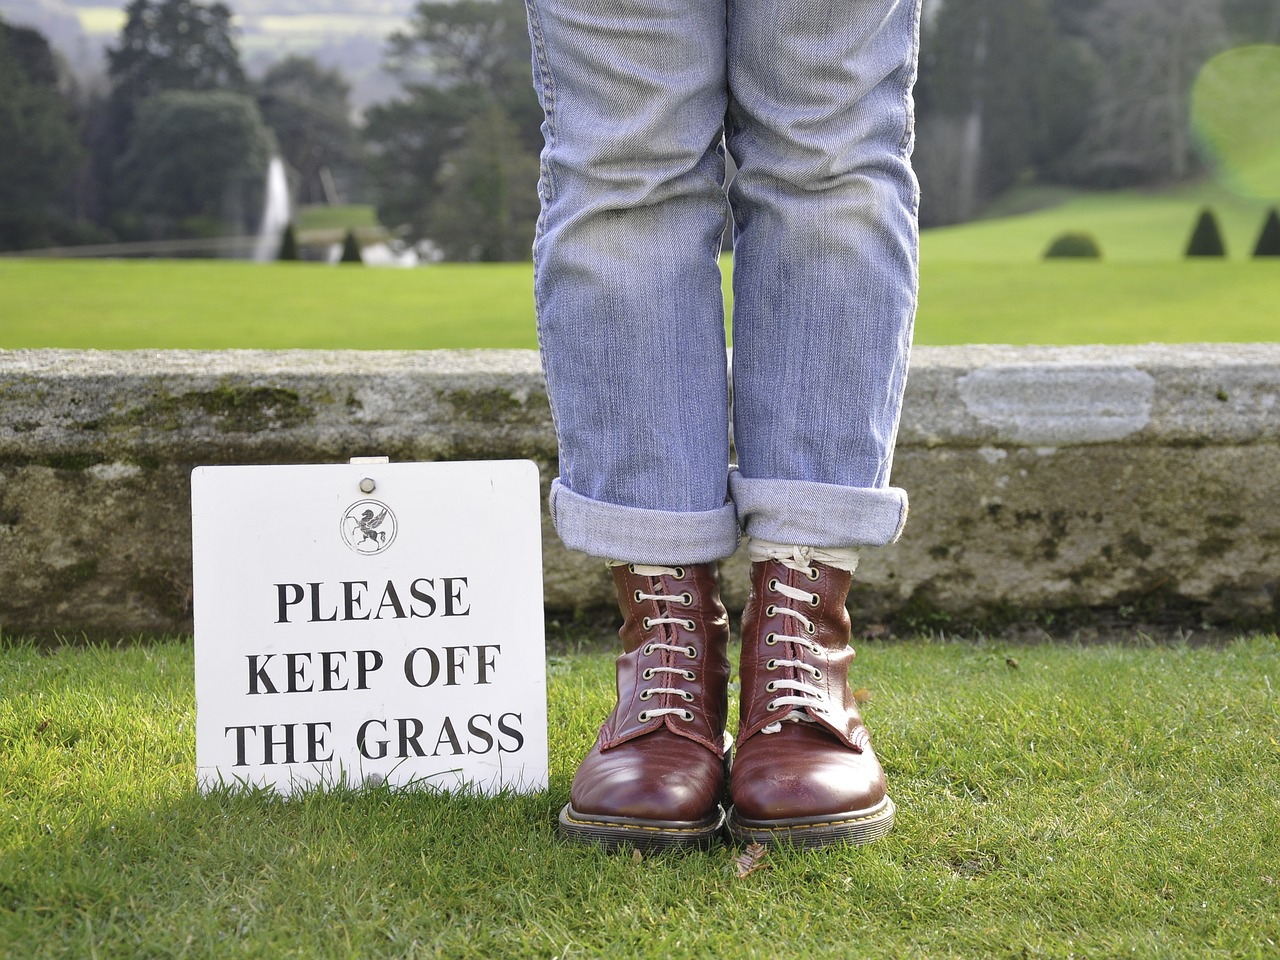 Man Standing on Grass next to "Please Keep Off the Grass" Sign